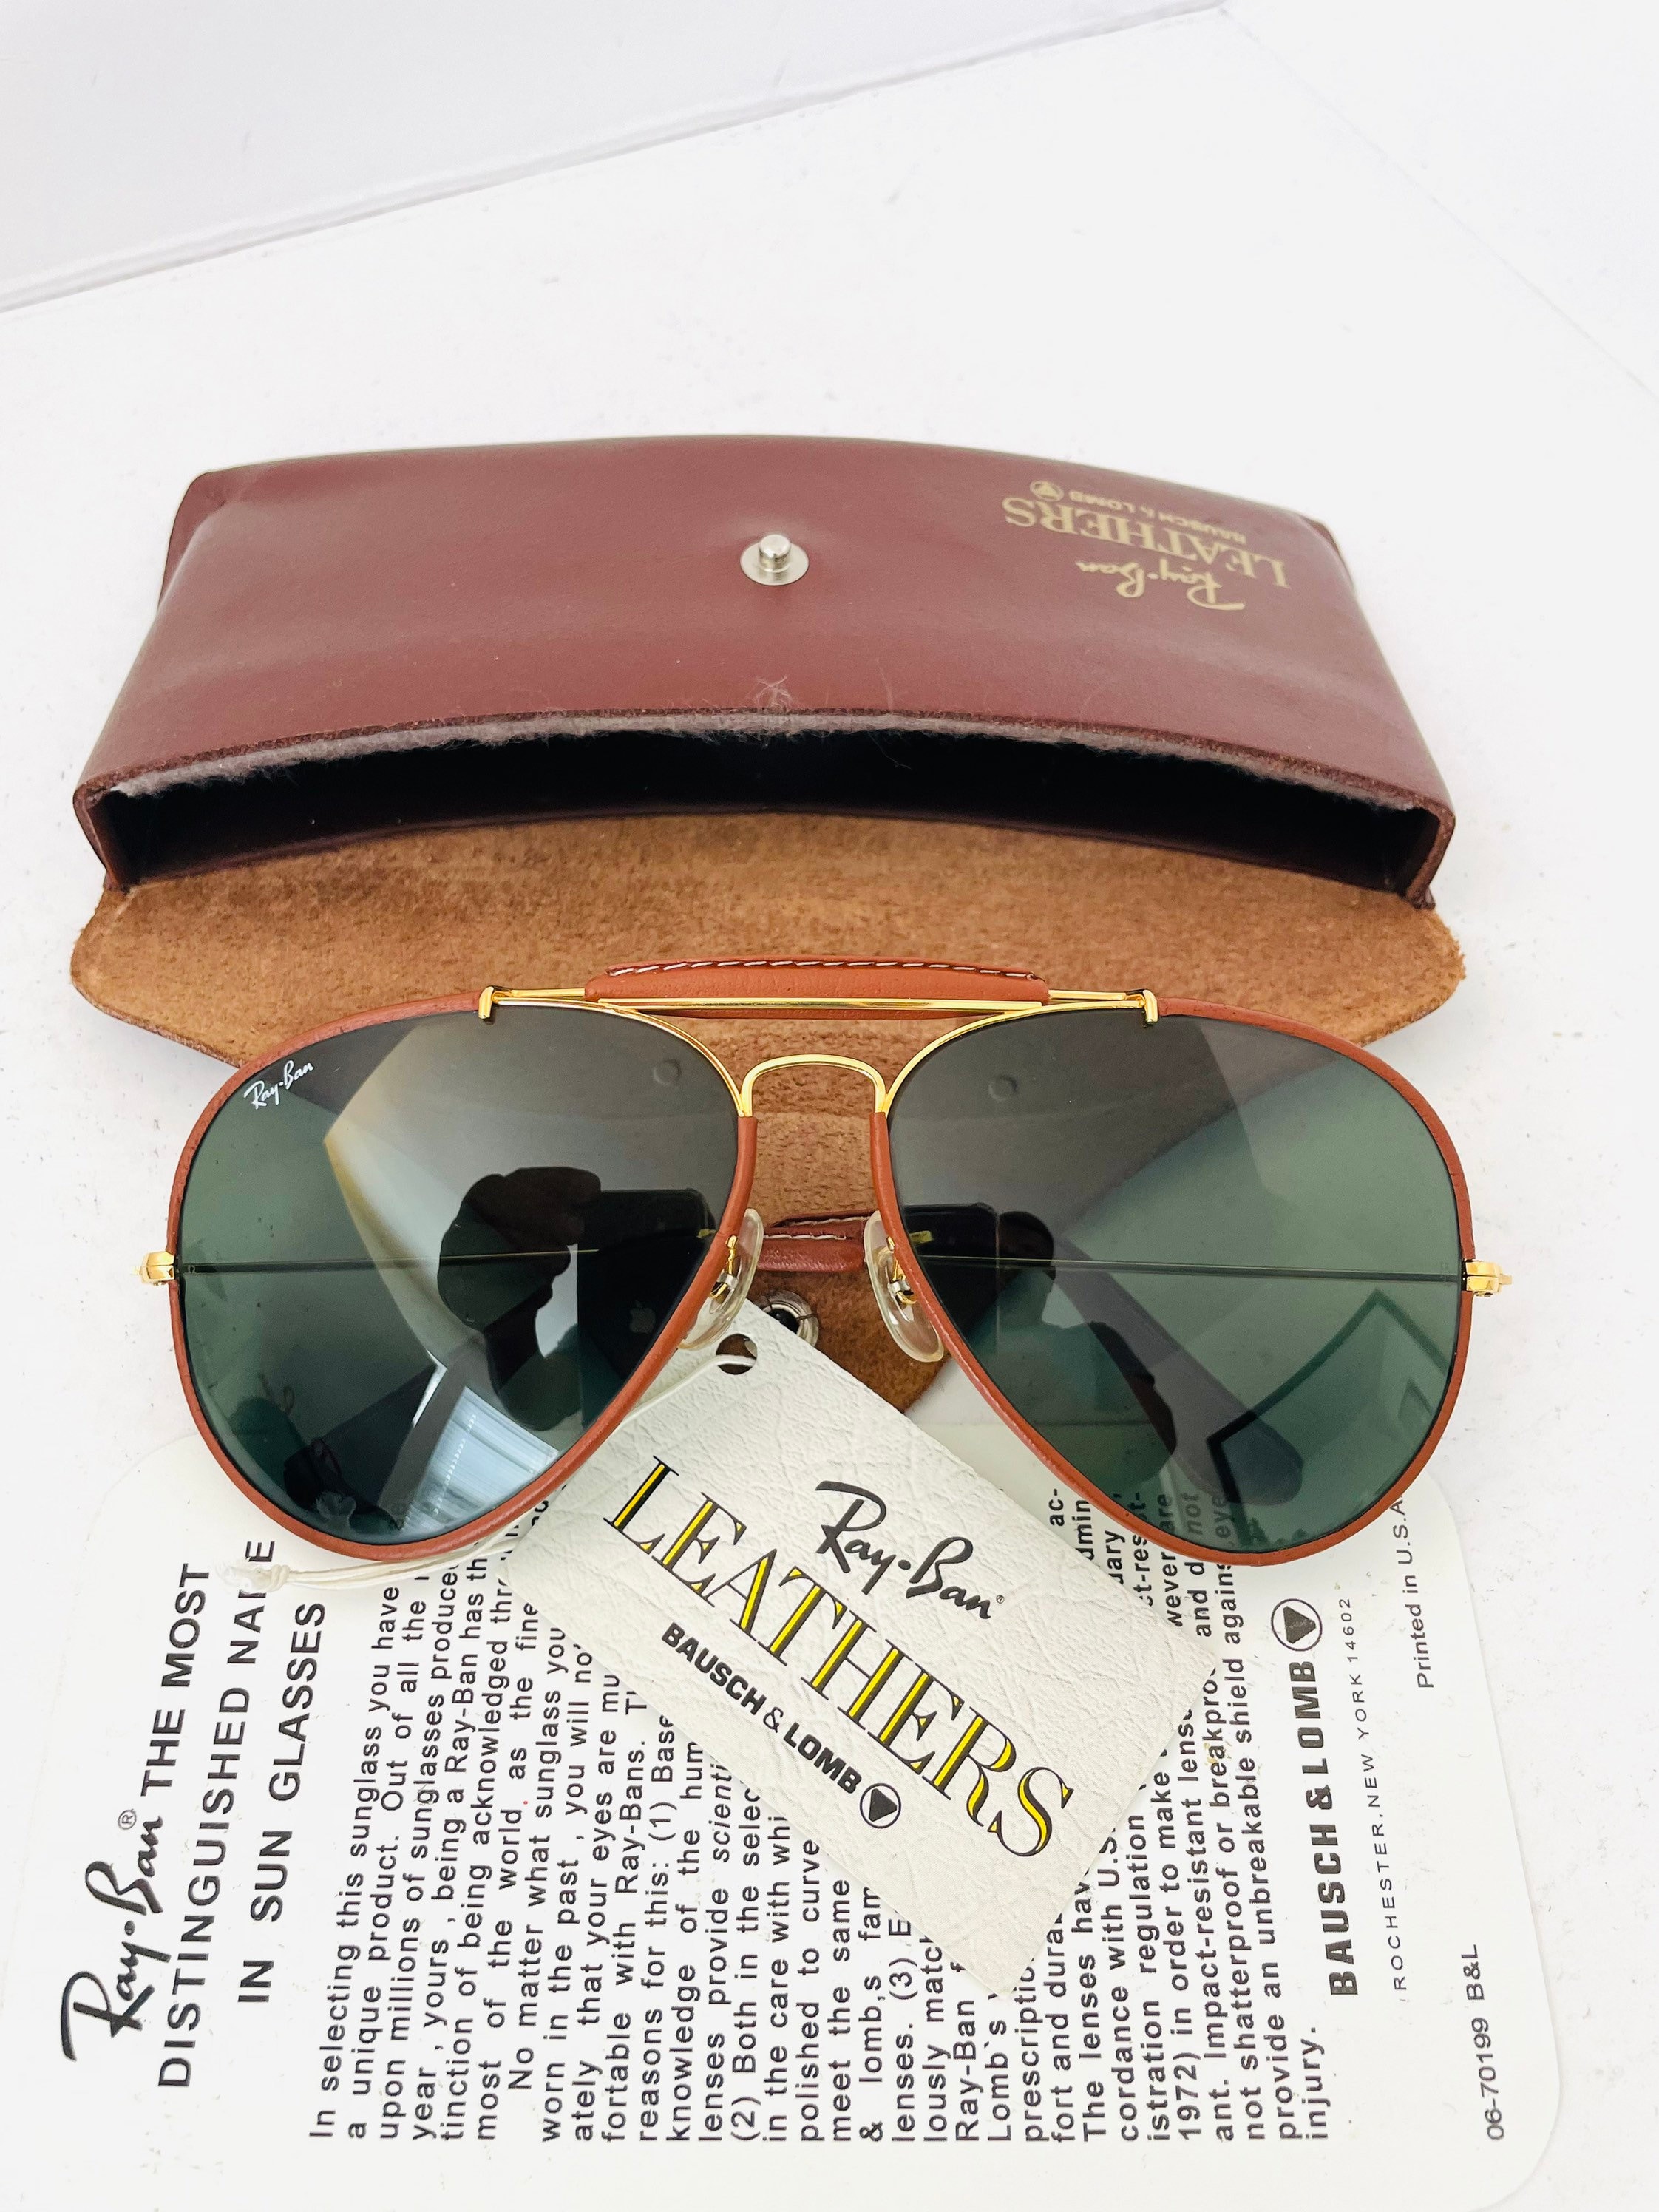 58M New Old Stock Aviator Leather Bausch & Lomb Ray Ban - Etsy